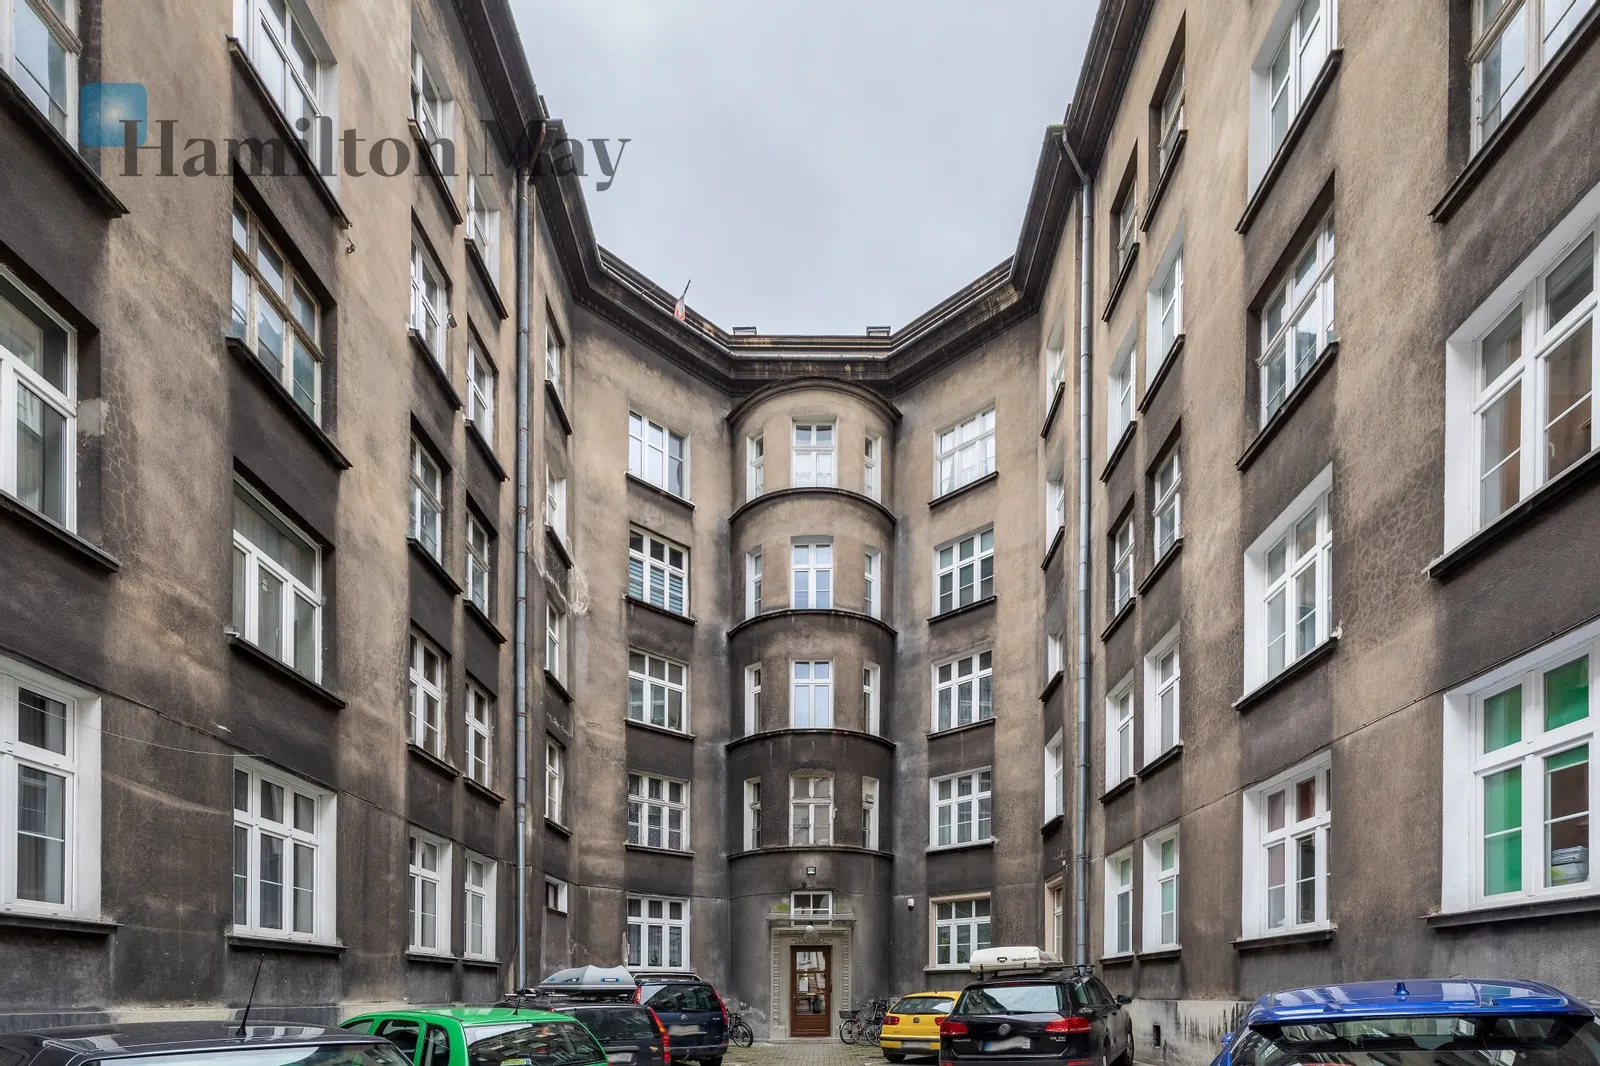 For sale, 2-room apartment in the heart of the Old Town -  Zyblikiewicza street